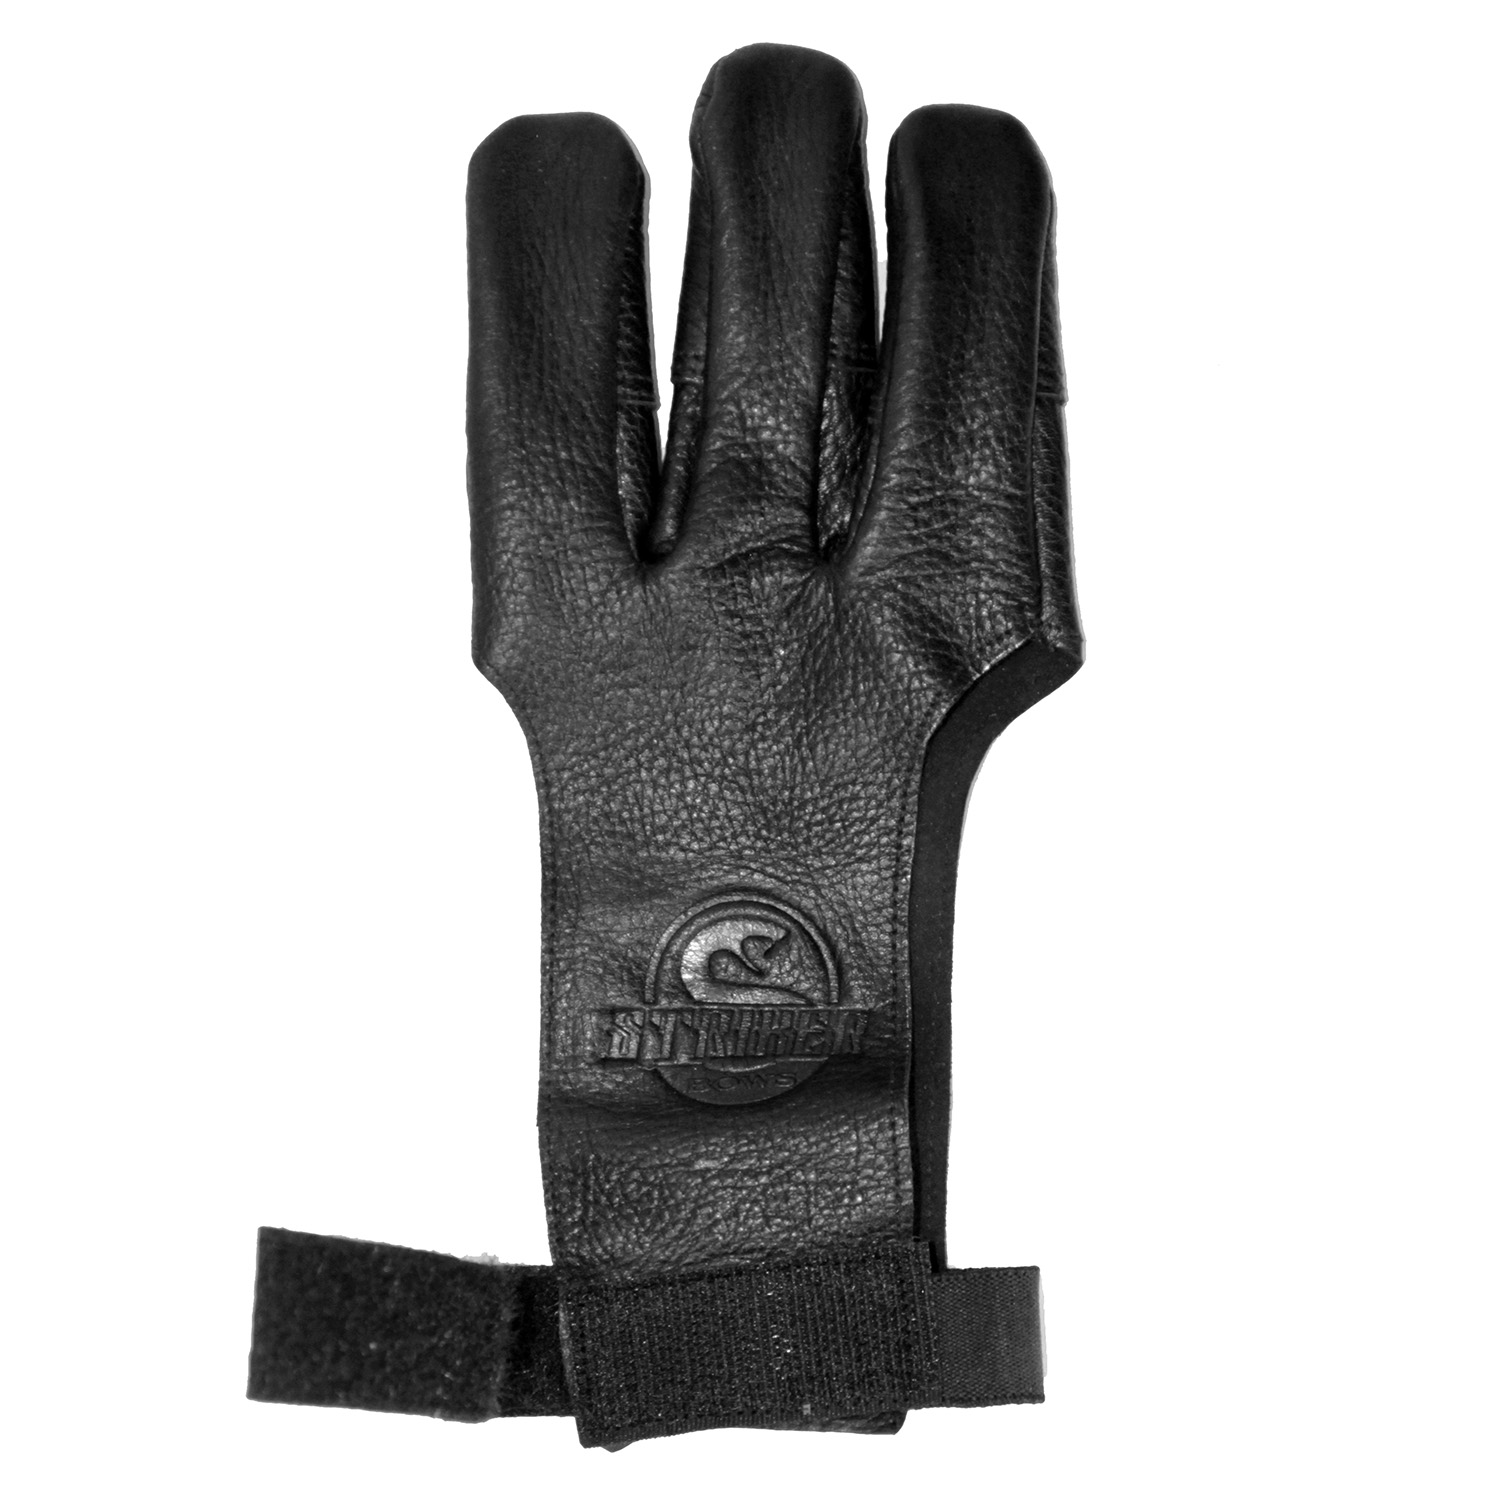 Shooting Glove Glove El Toro Bow Glove Panther for Left Hand 